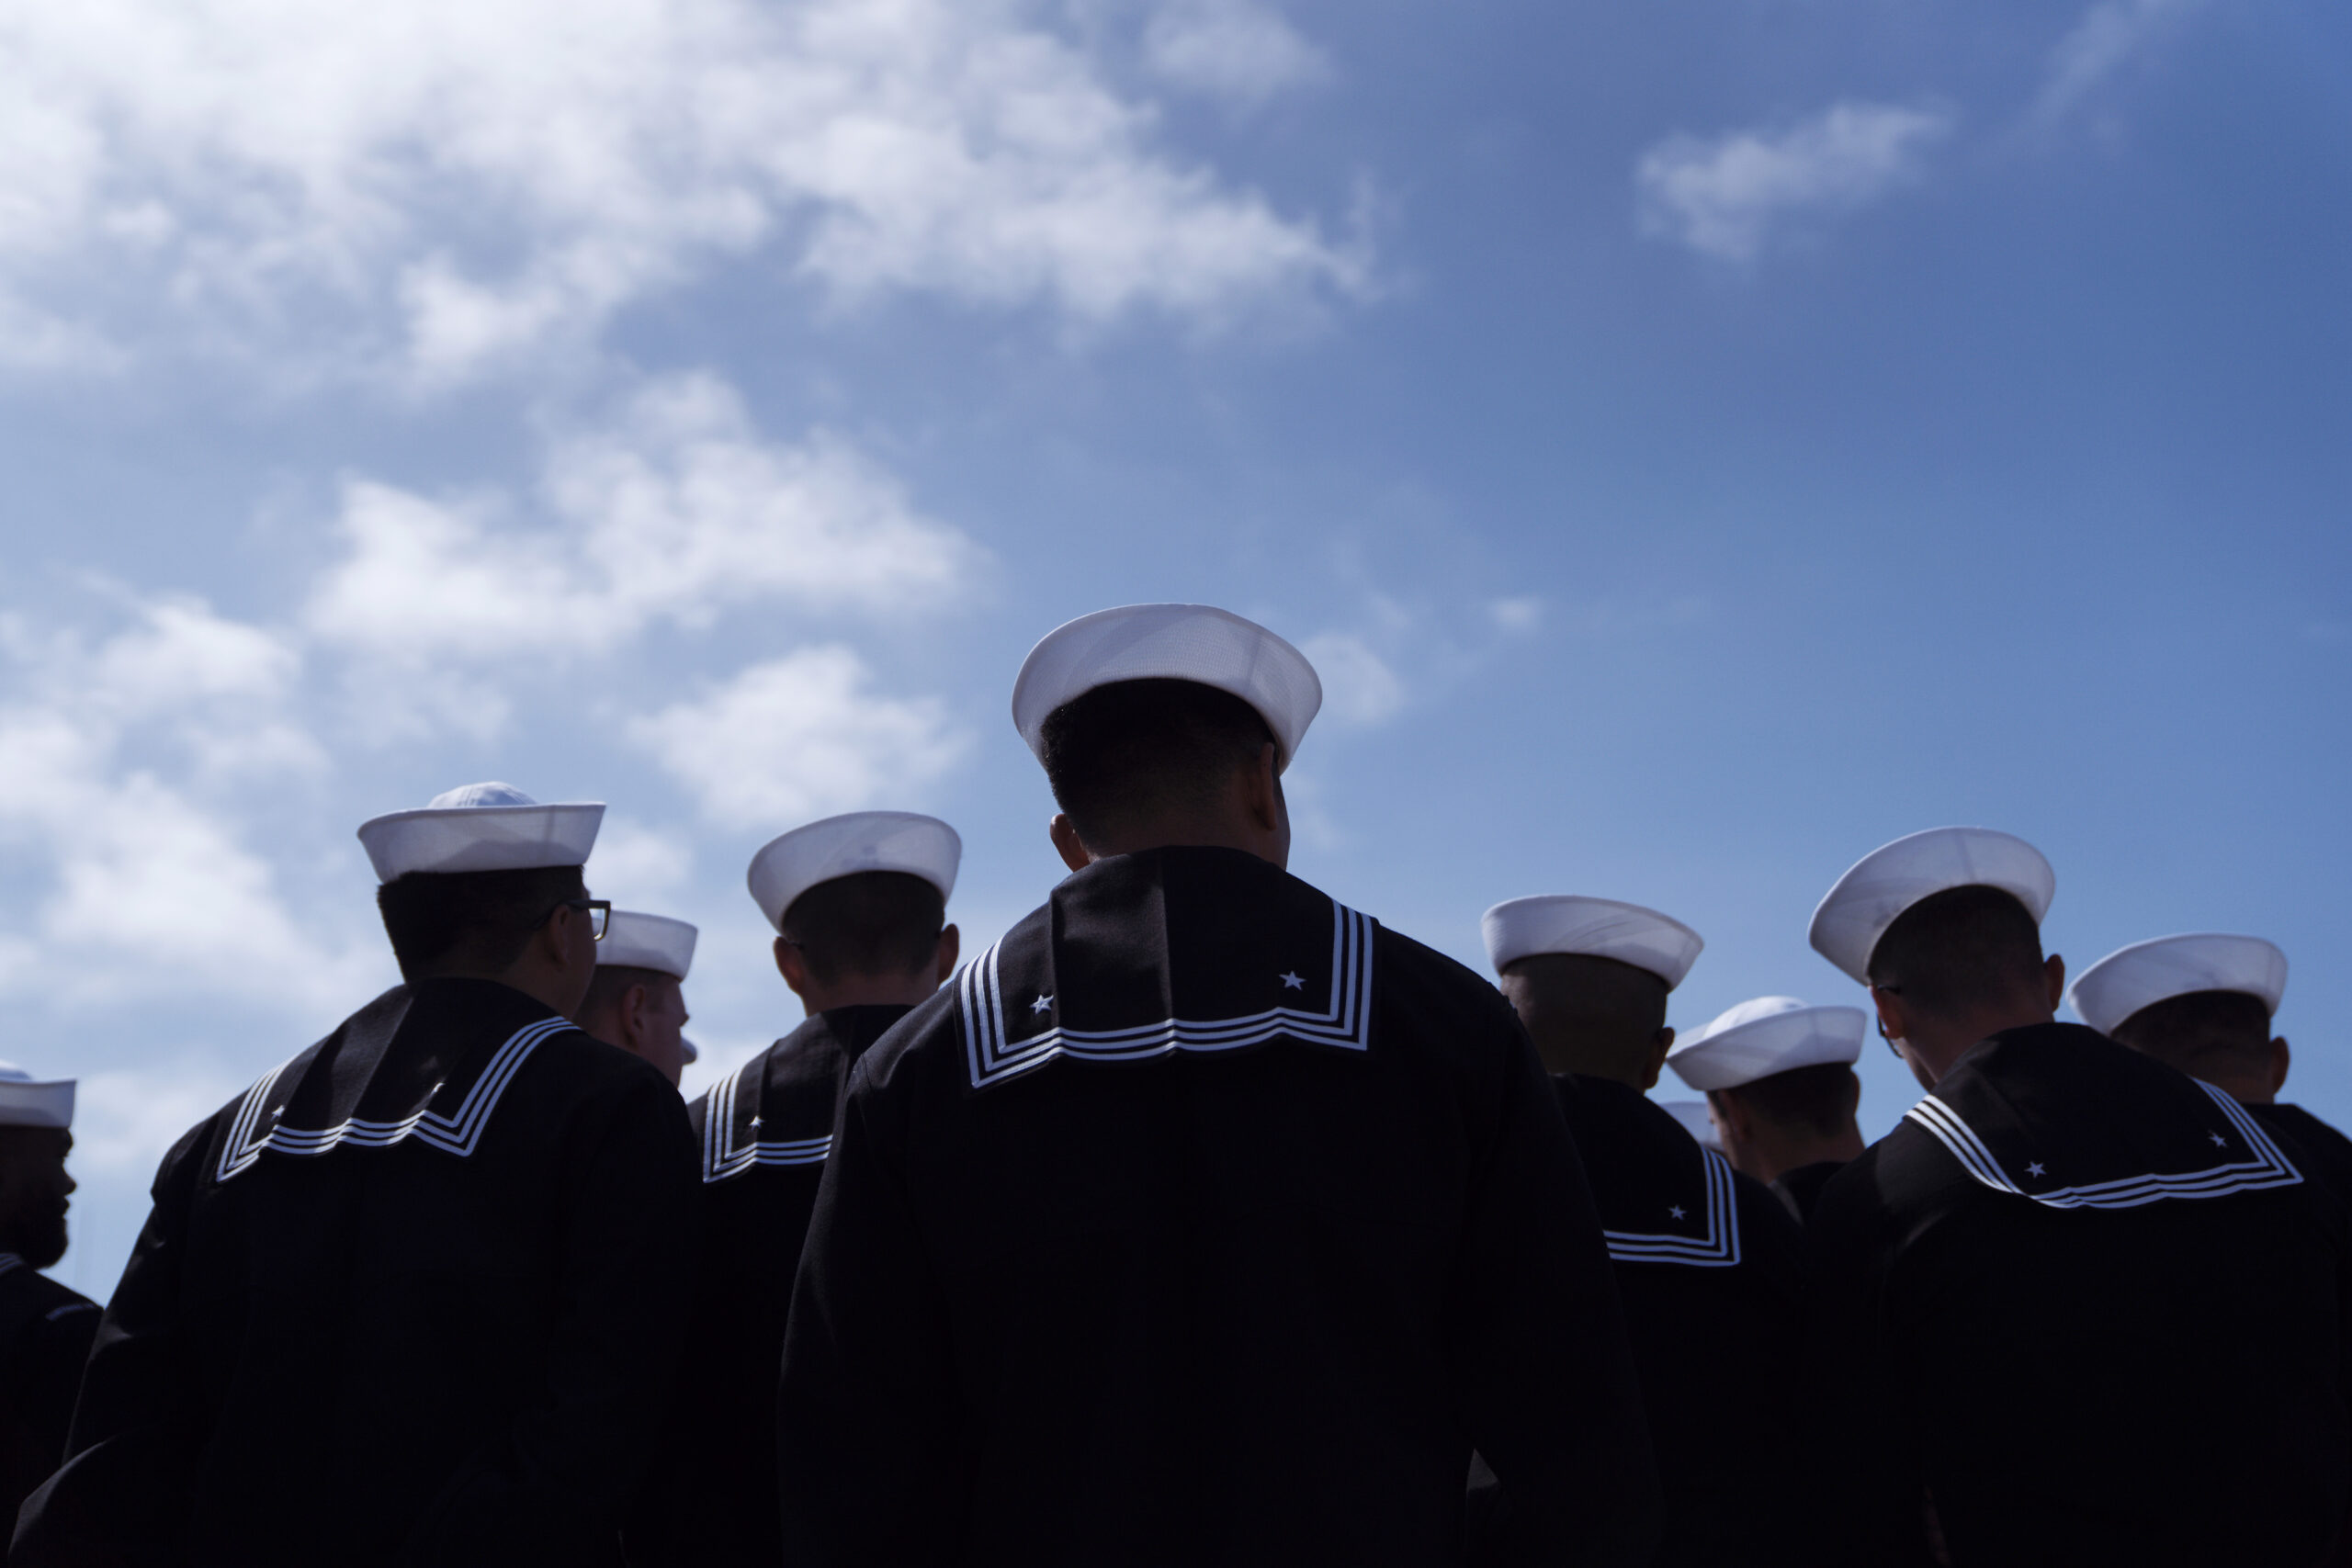 Two U.S. Navy Sailors detained for espionage, suspected of having connections with China.